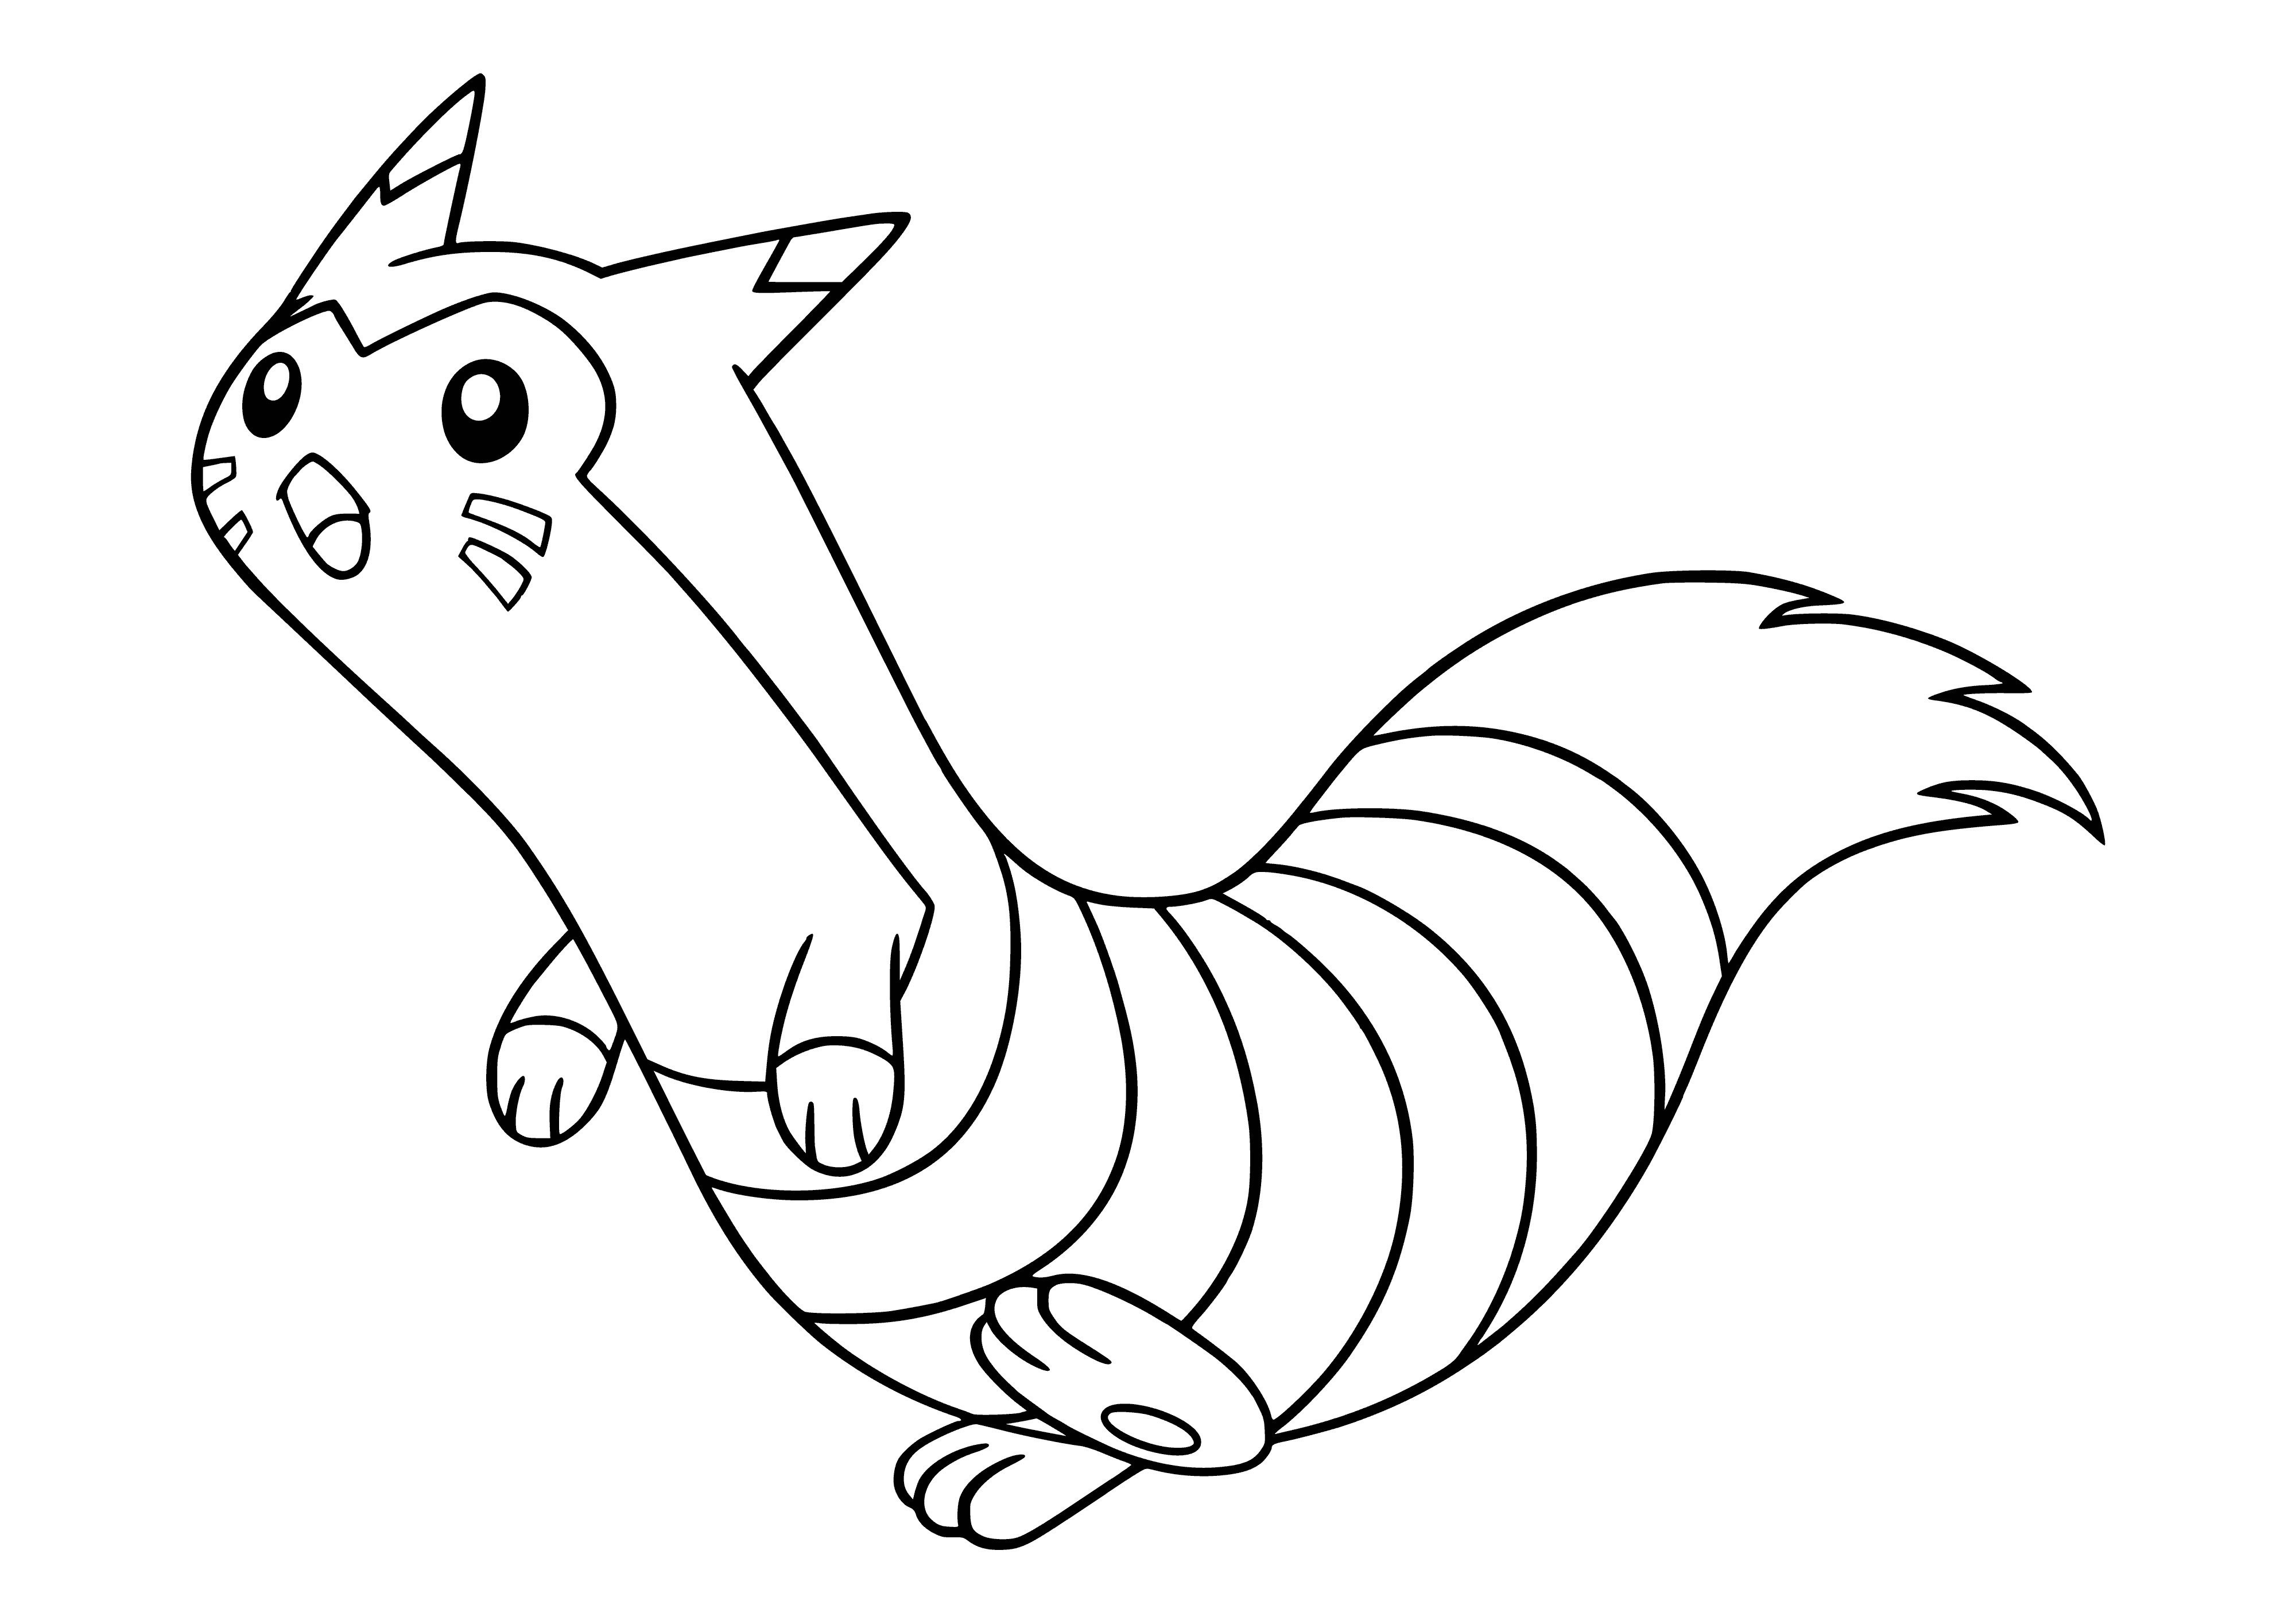 coloring page: Furret is a long, furry Pokemon w/ small head, long tail, cream belly, & 4 black toes on each foot.